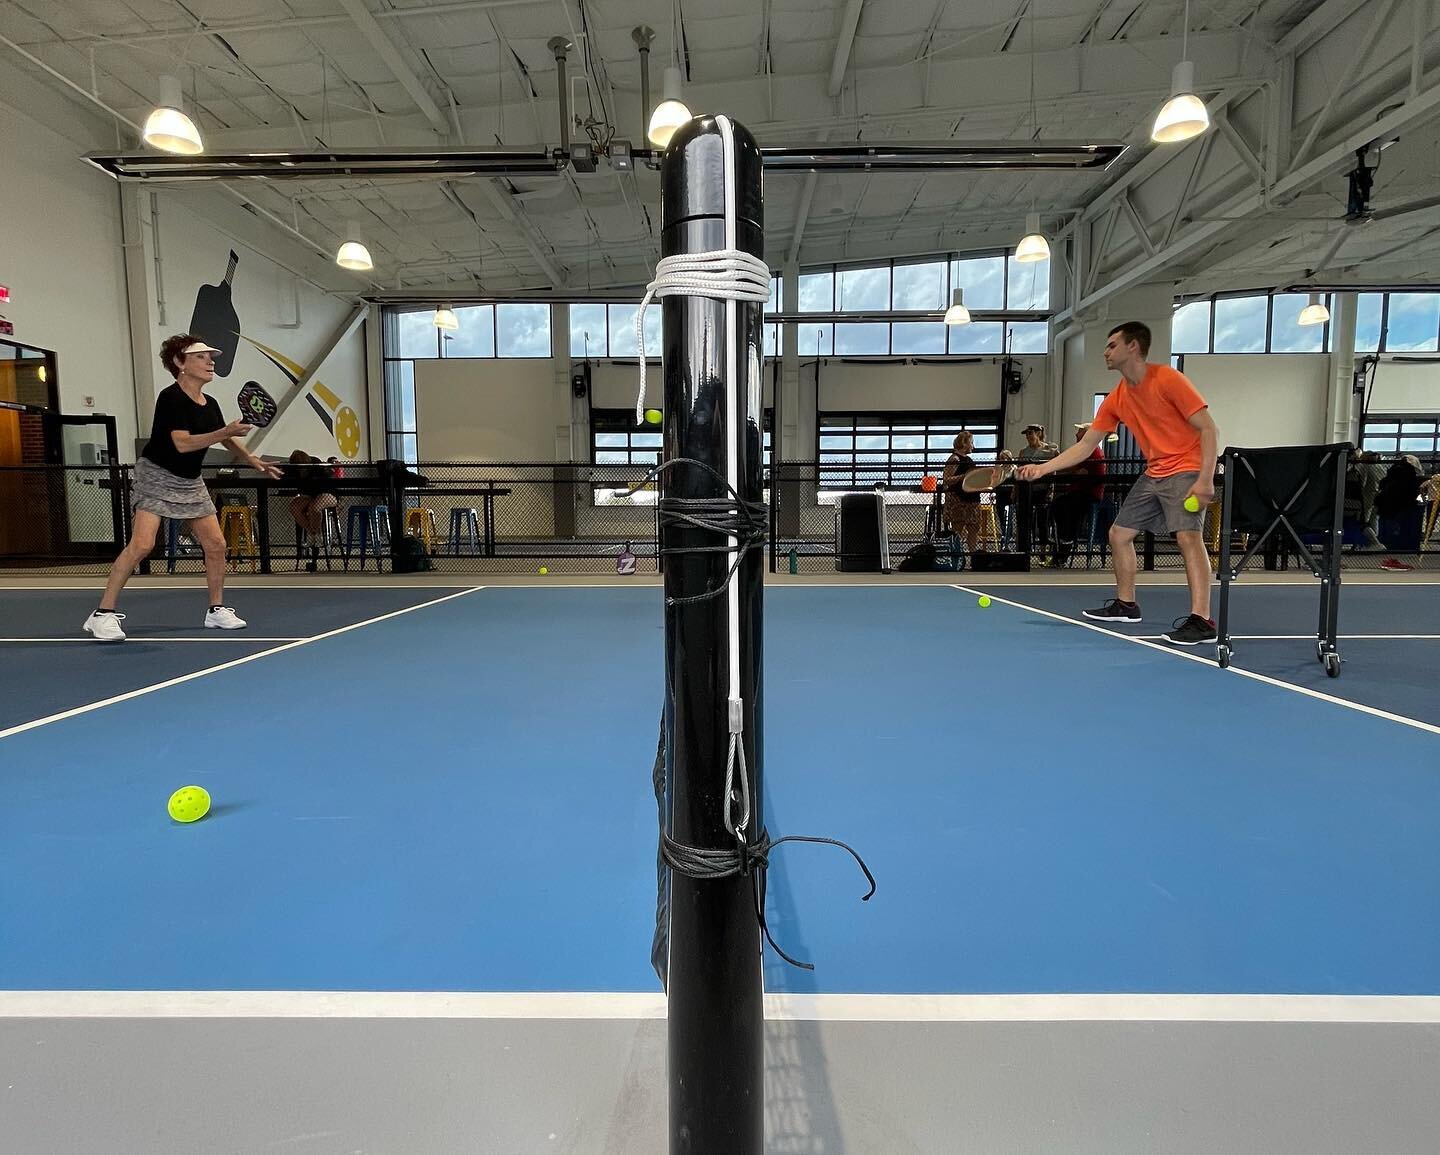 New to the game of pickleball and want to learn how to play? 
Have goals you want to achieve in pickleball but just not sure how to get there? 
For beginners and advanced players alike, d3 pickleball lessons will train you and help crush those goals!